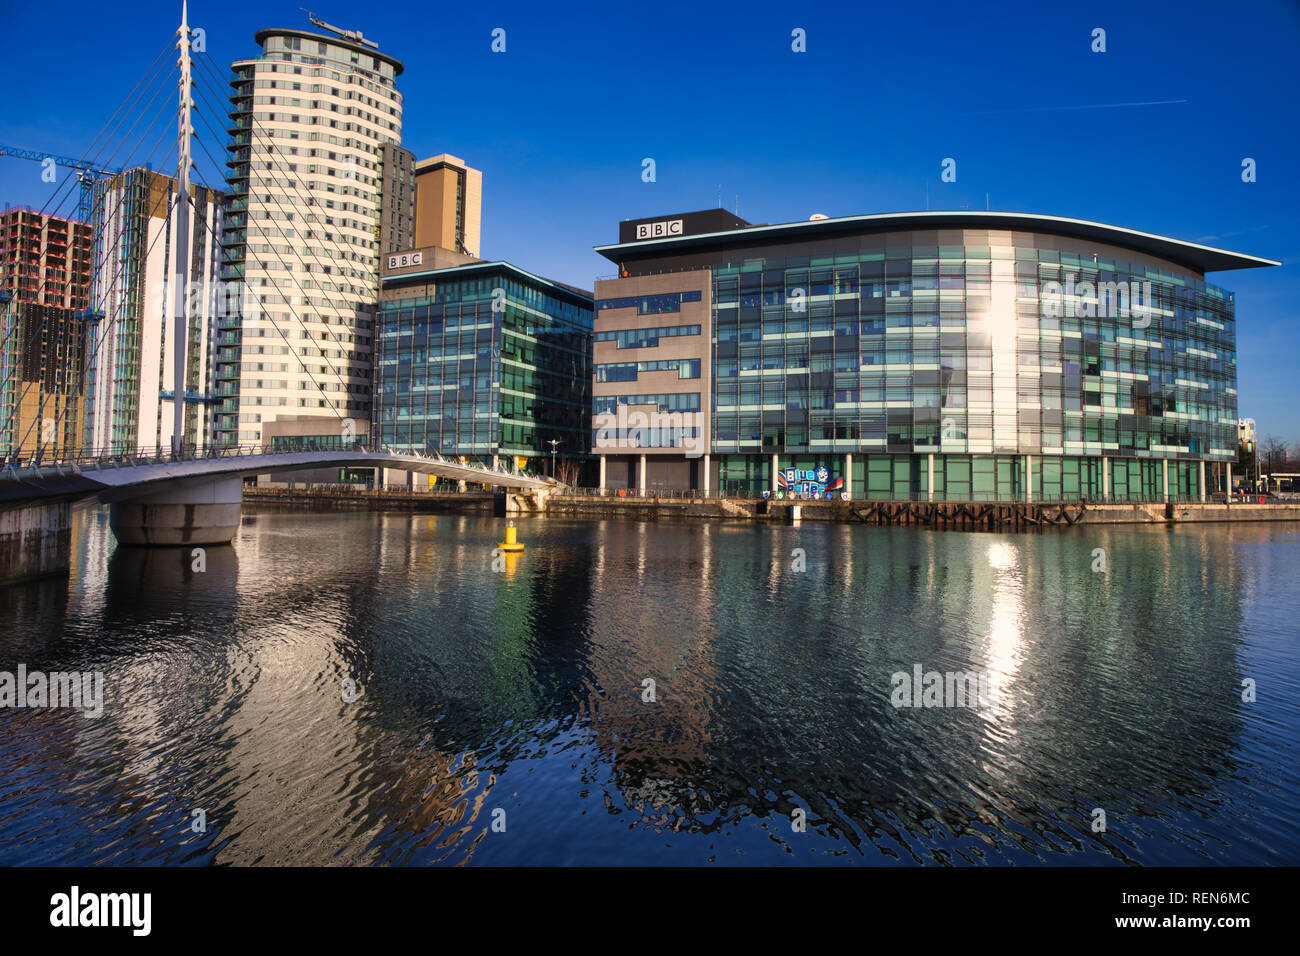 MediaCityUK, the BBC and Media City Footbridge crossing the Manchester Ship Canal, Salford Quays, Greater Manchester, United Kingdom Stock Photo